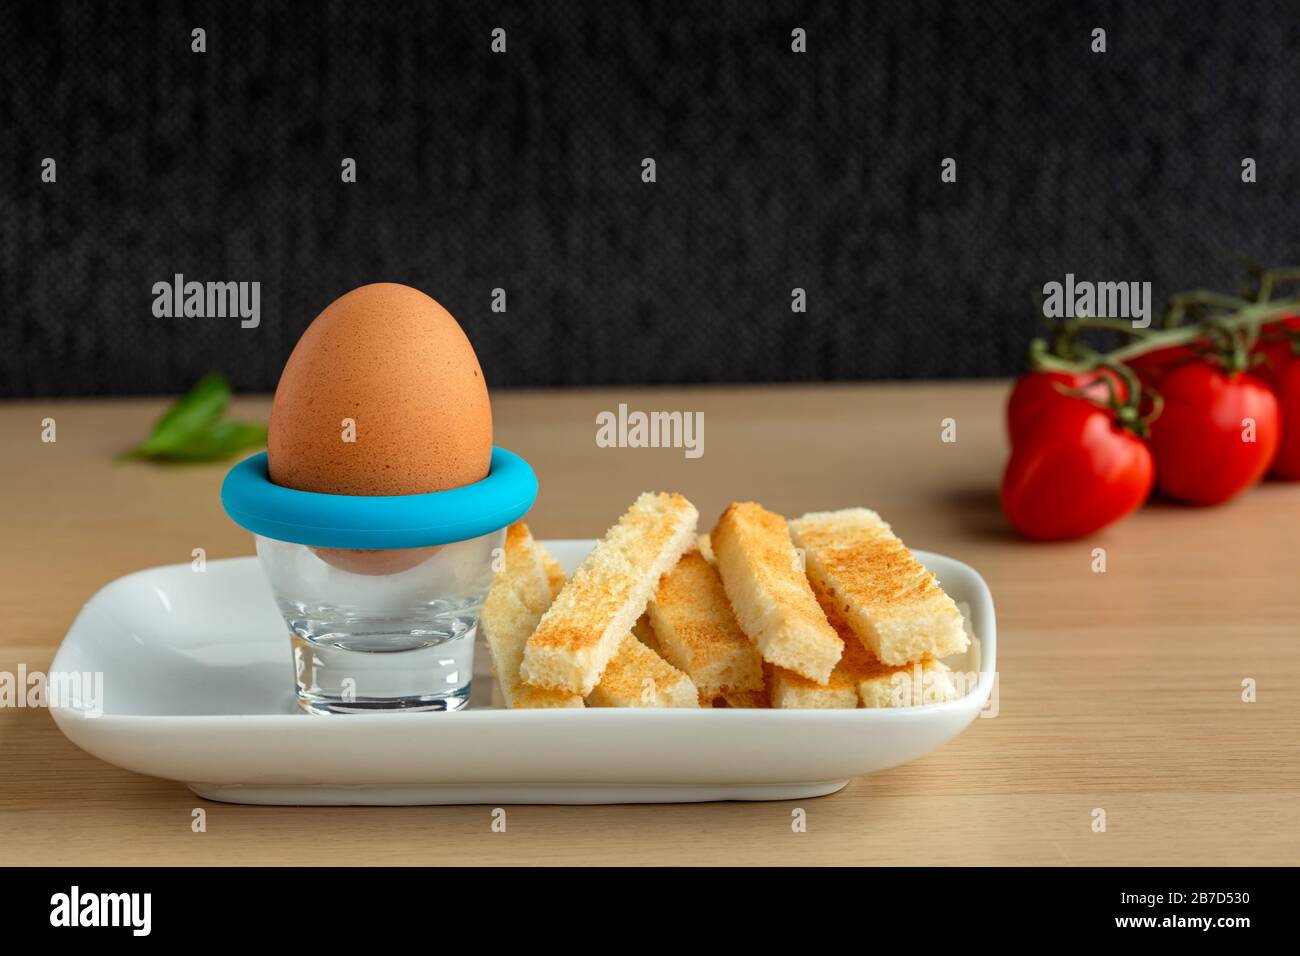 Brakfast food - boiled egg with toast on plate Stock Photo